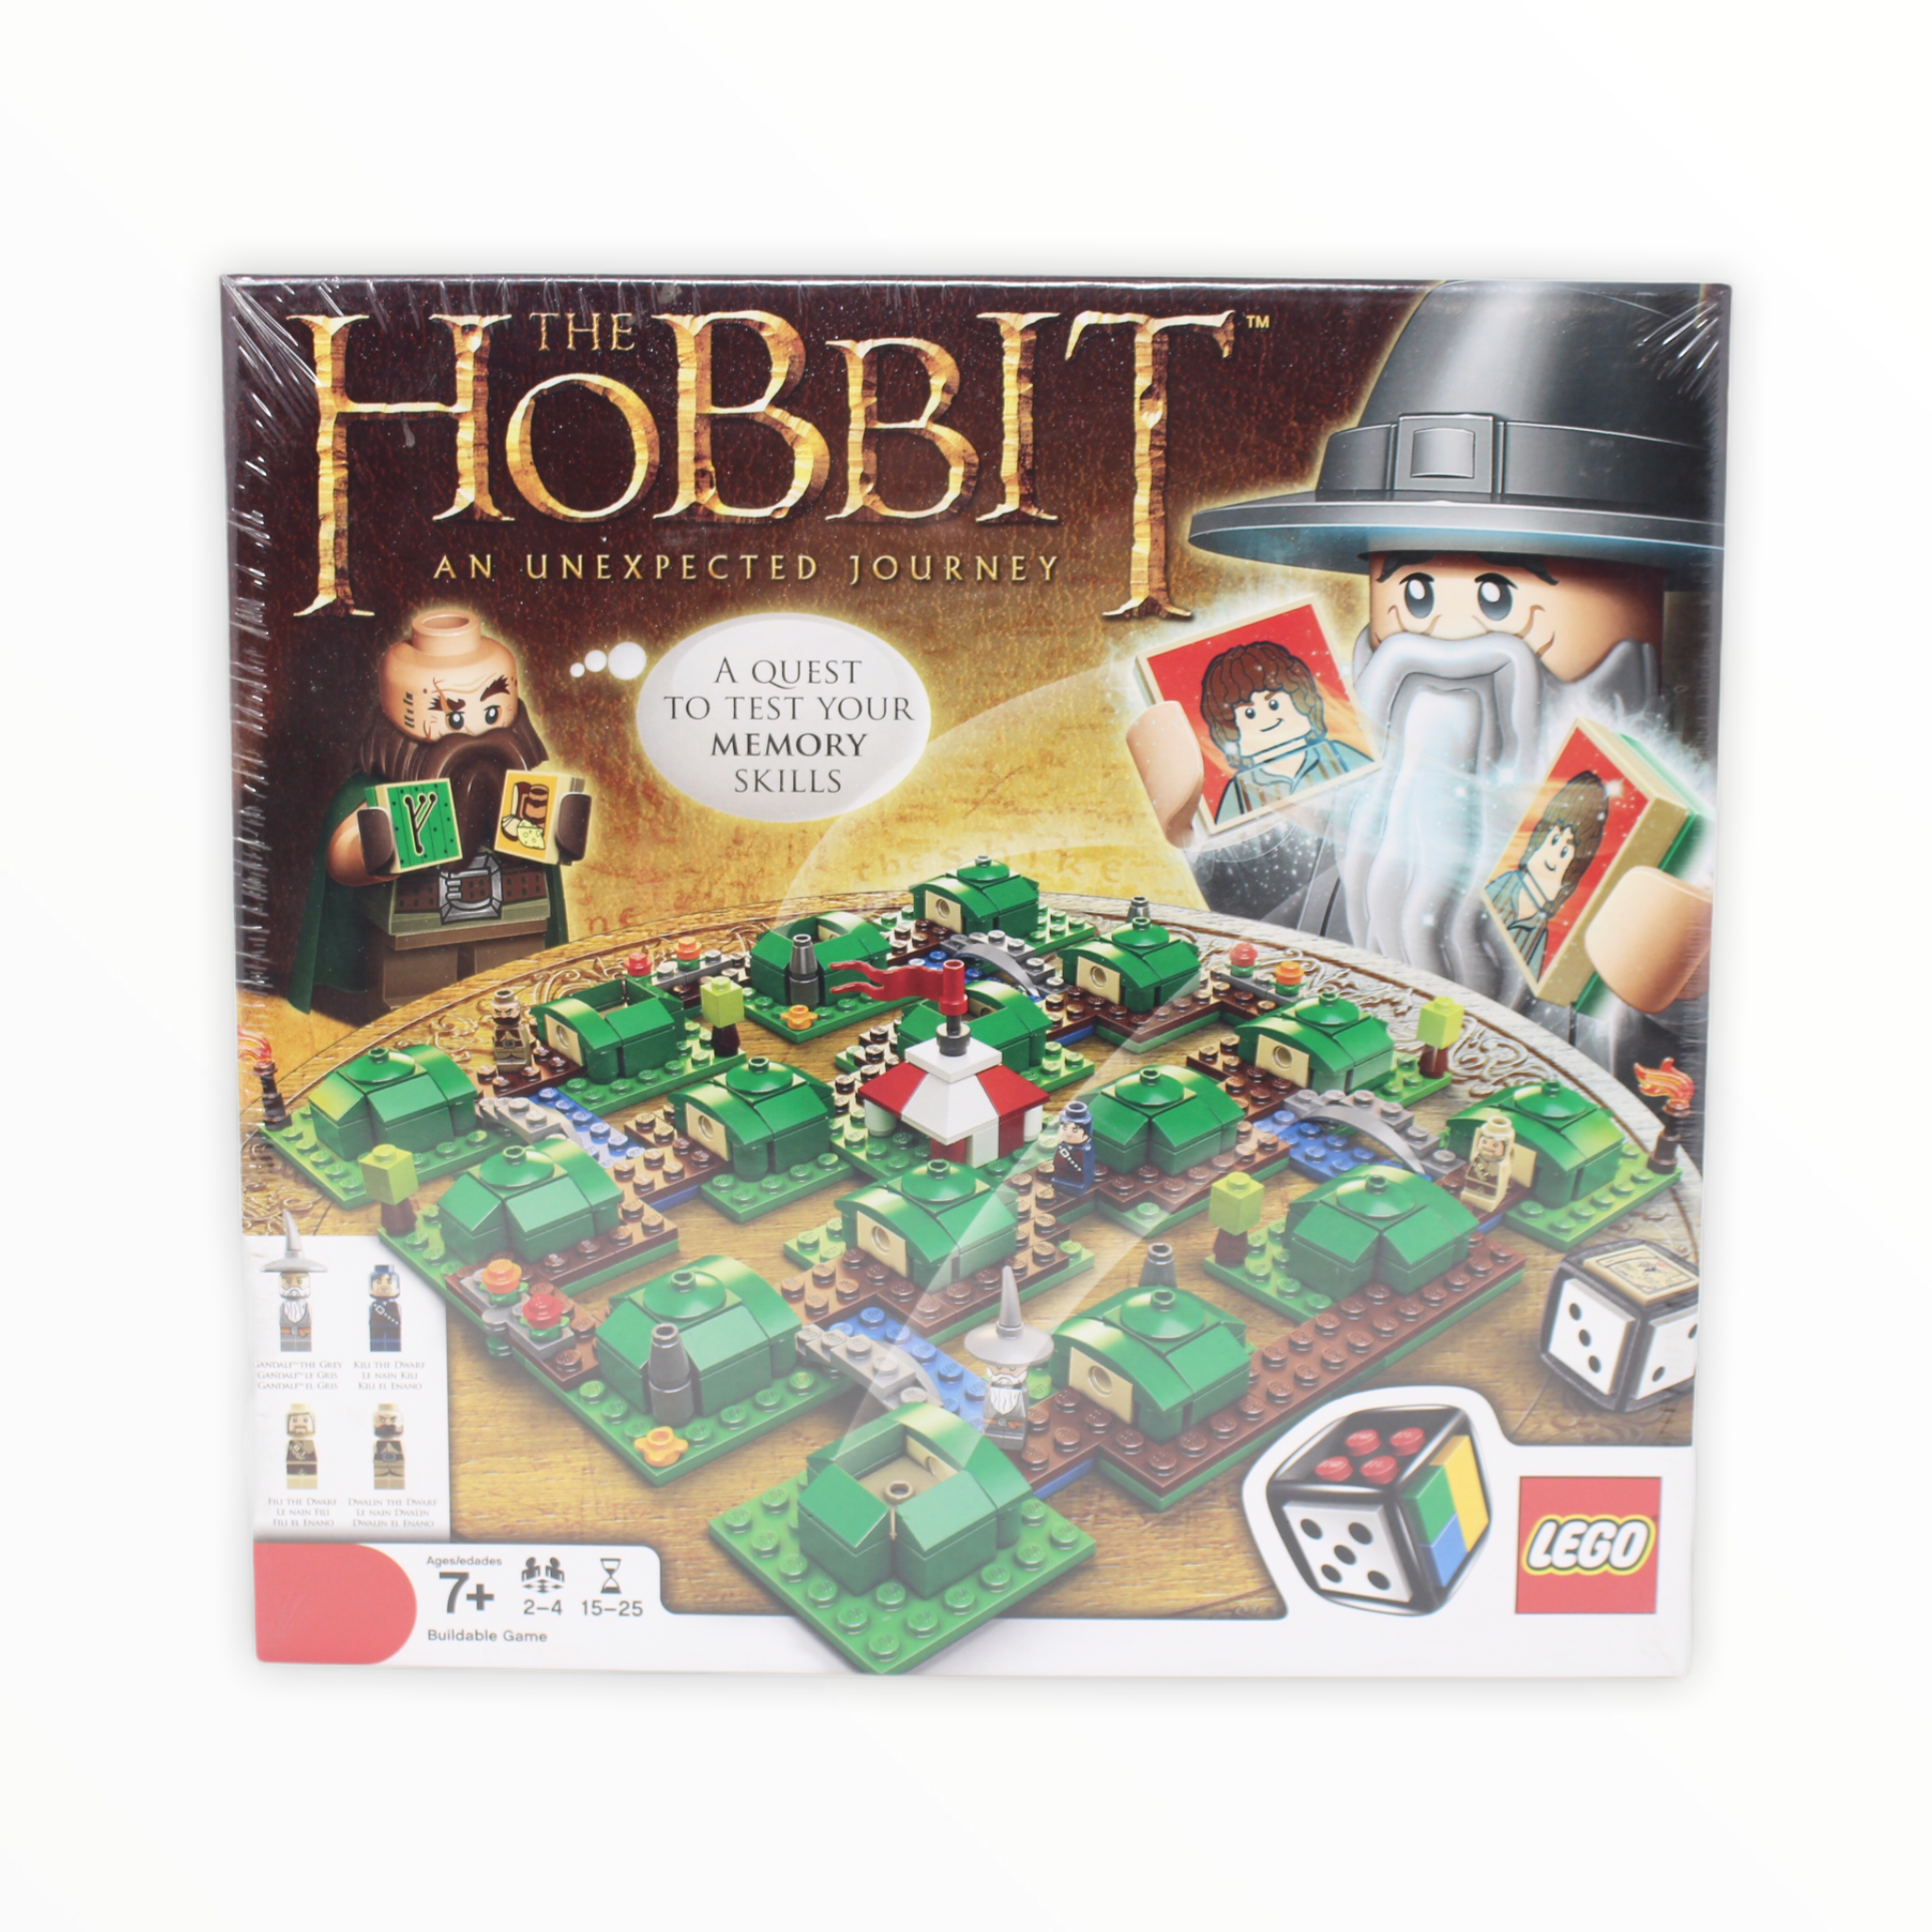 Retired Set 3920 The Hobbit - An Unexpected Journey